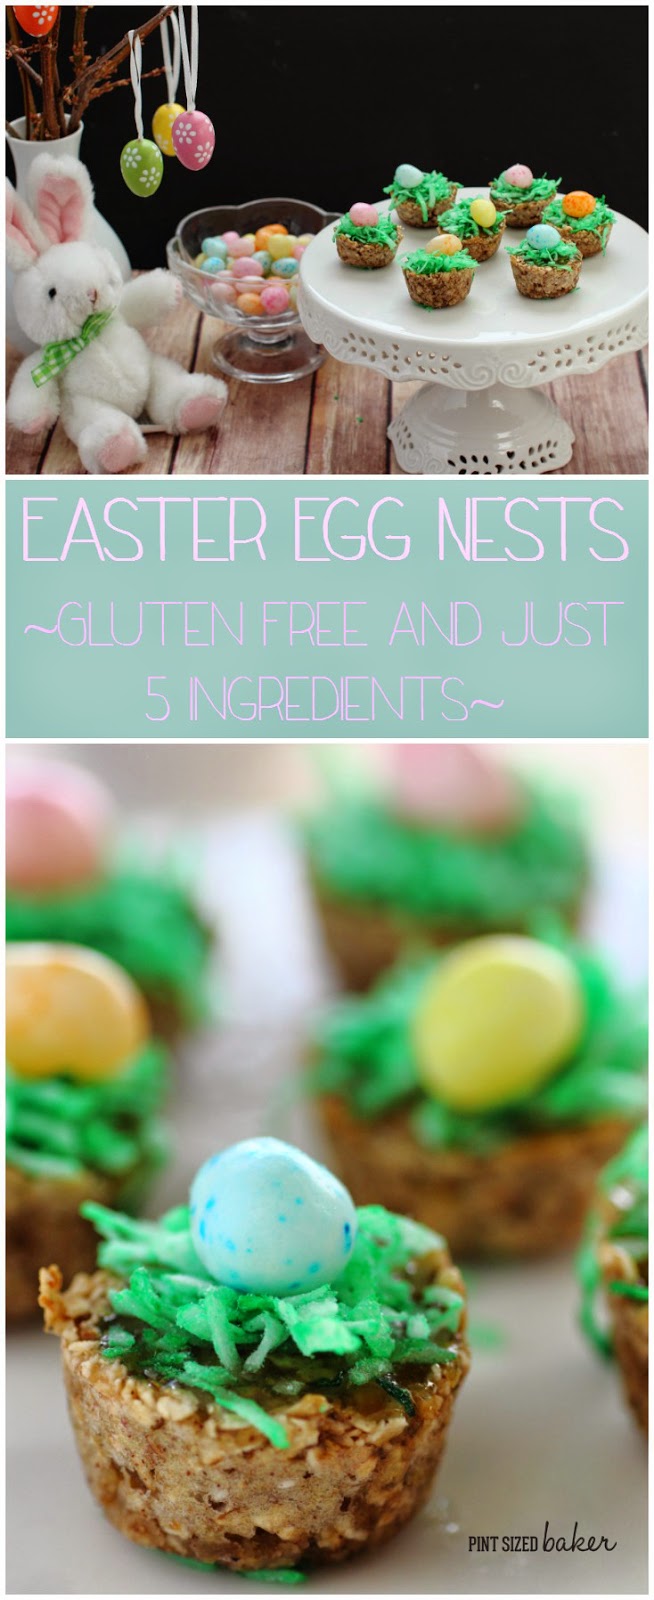 Get ready for the Easter Bunny with this Easter Egg Nest Recipe! Your children will enjoy making them with you and they're simple but cute! Easter Egg Nests that are Gluten Free and have just 5 ingredients. Whip 'em up quick!